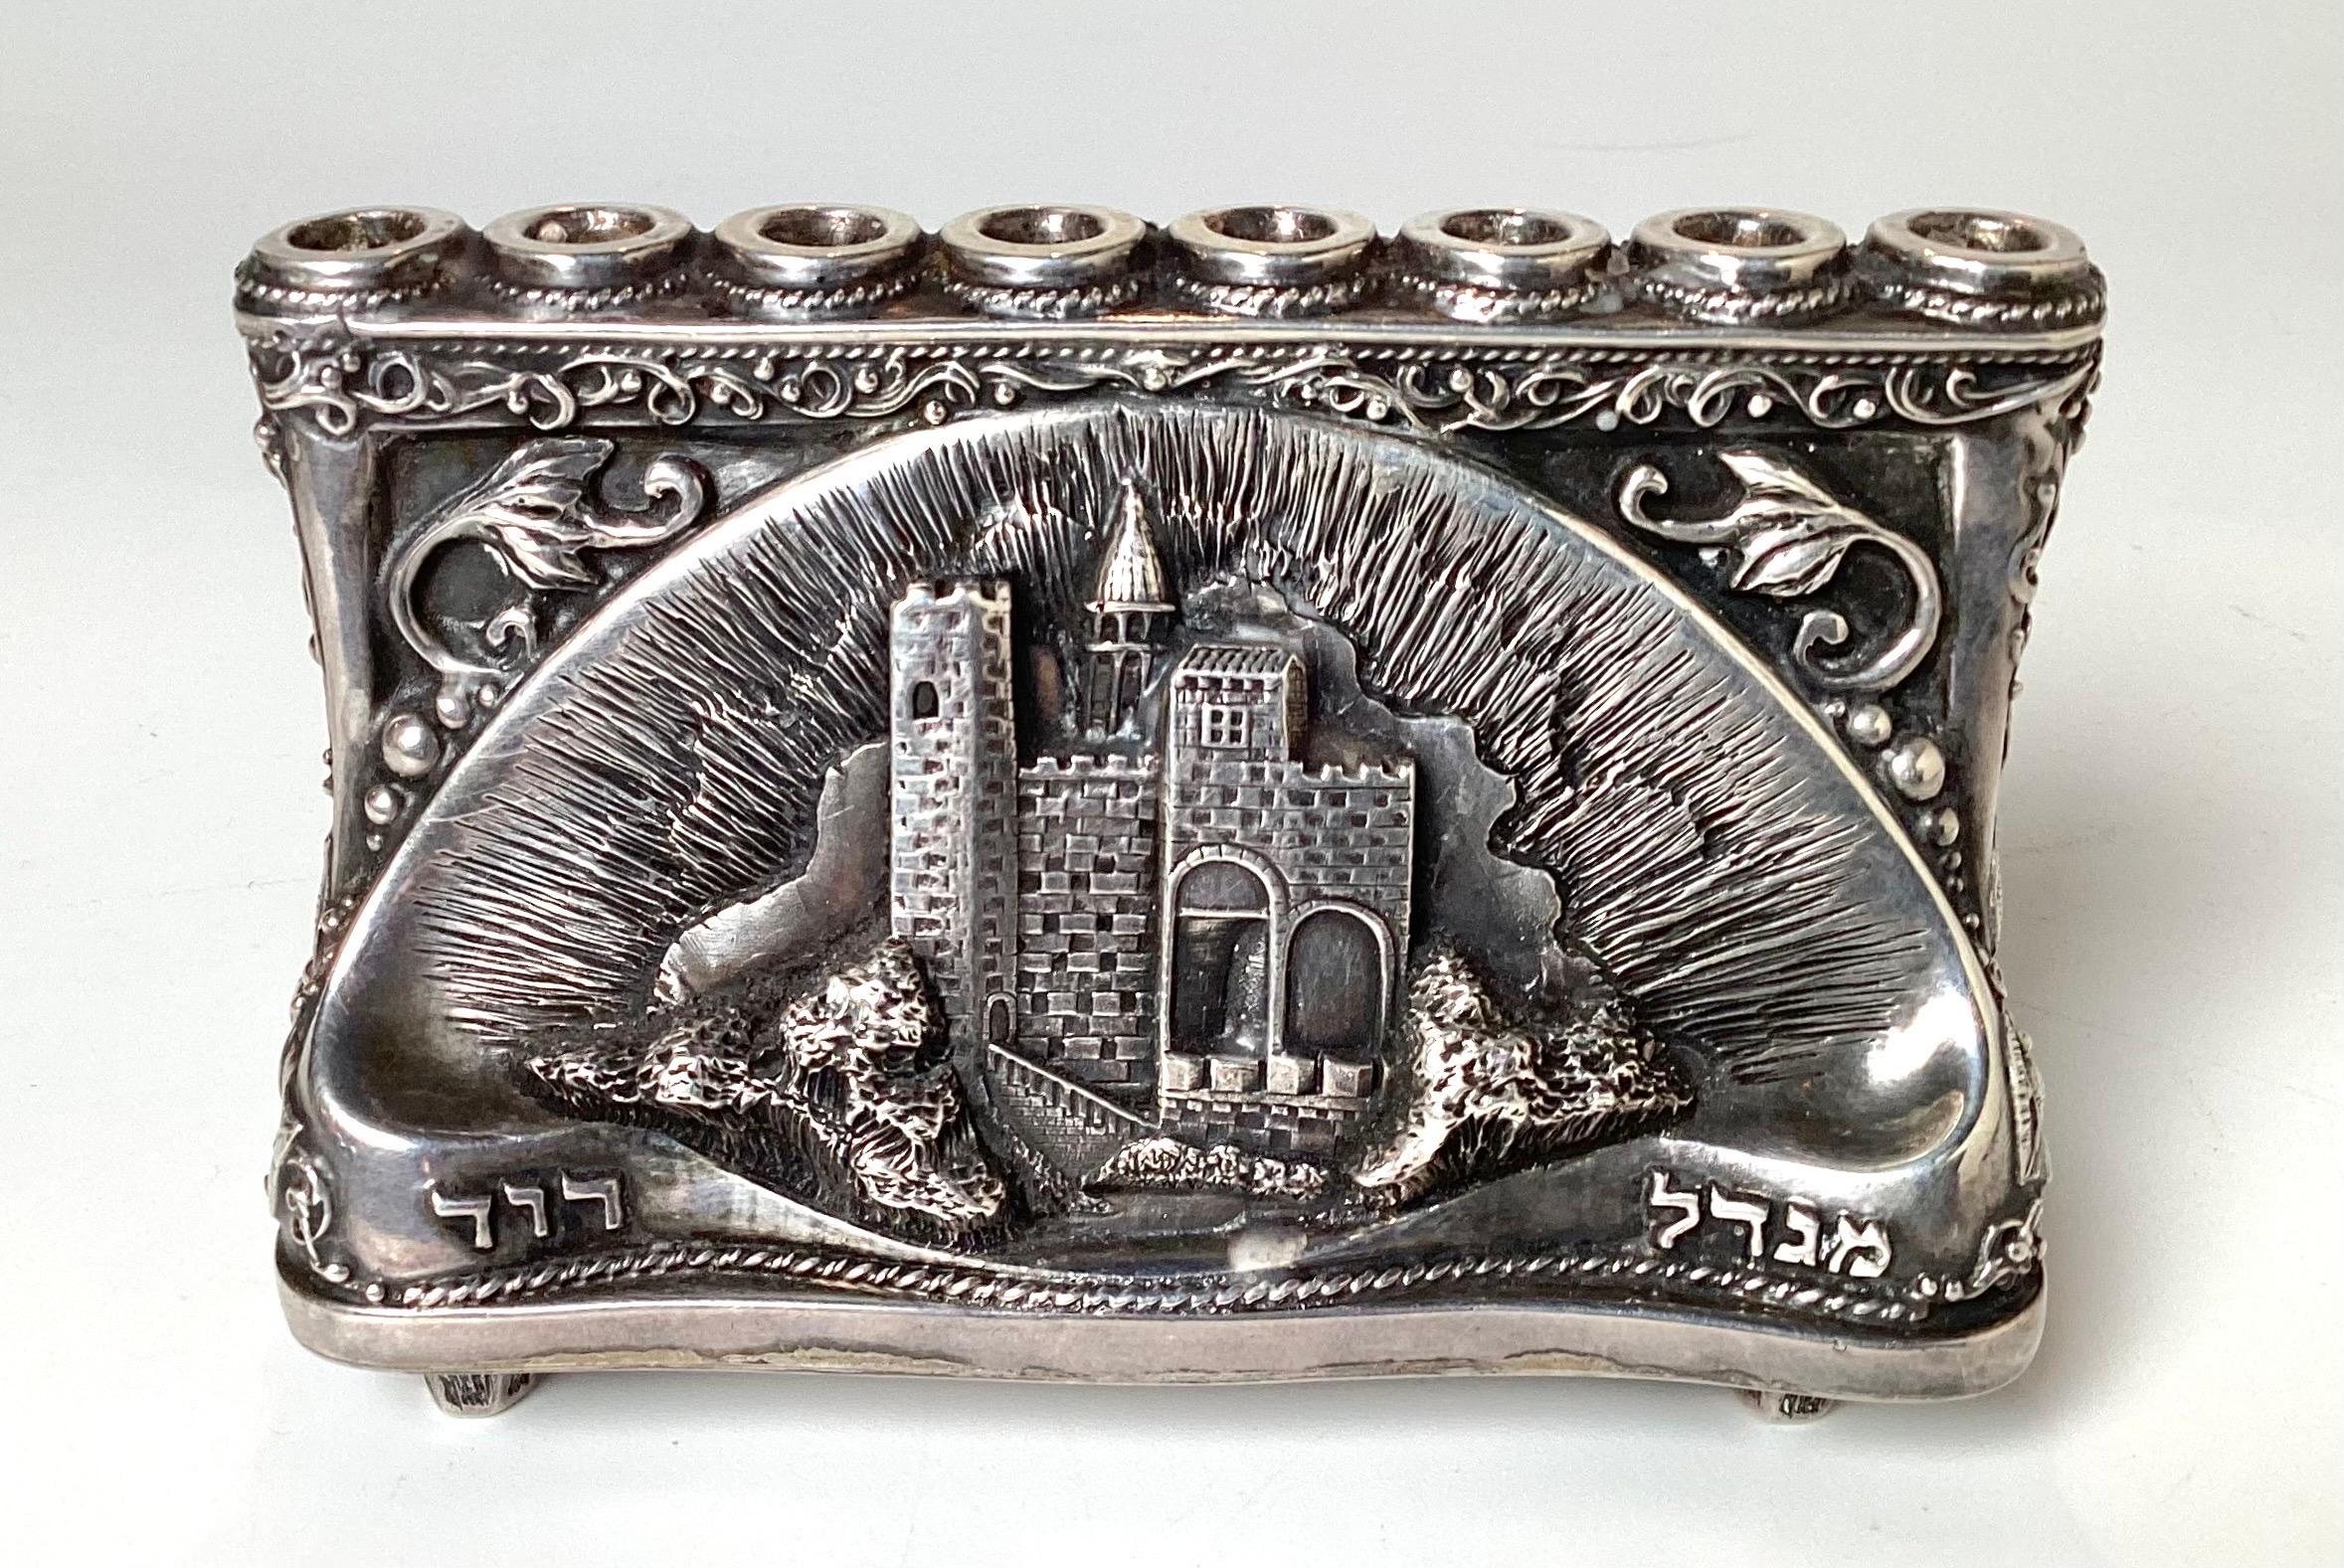 A signed Henryk Winograd 99.9 Silver diminutive menorah. Hand made repose with high relief details. 3 icnes high, 4 inches wide, 2 inches deep. 
Henryk Winograd was one of the world's greatest 20th century masters of traditional silversmithing